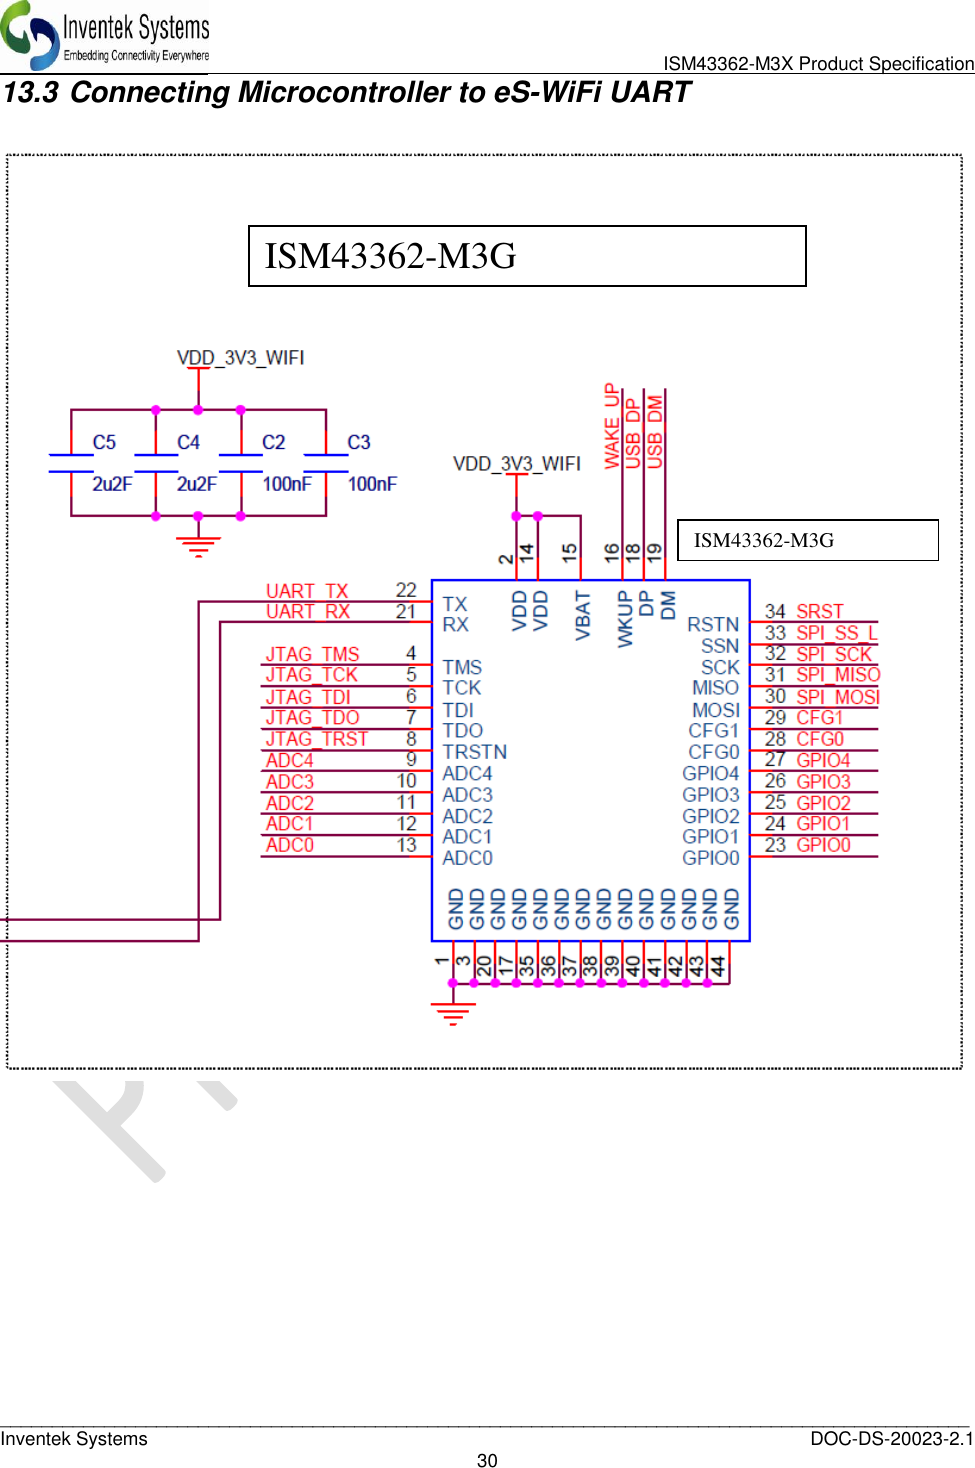                               ISM43362-M3X Product Specification _____________________________________________________________________________________________   Inventek Systems  DOC-DS-20023-2.1 30  13.3  Connecting Microcontroller to eS-WiFi UART            ISM43362-M3G ISM43362-M3G 